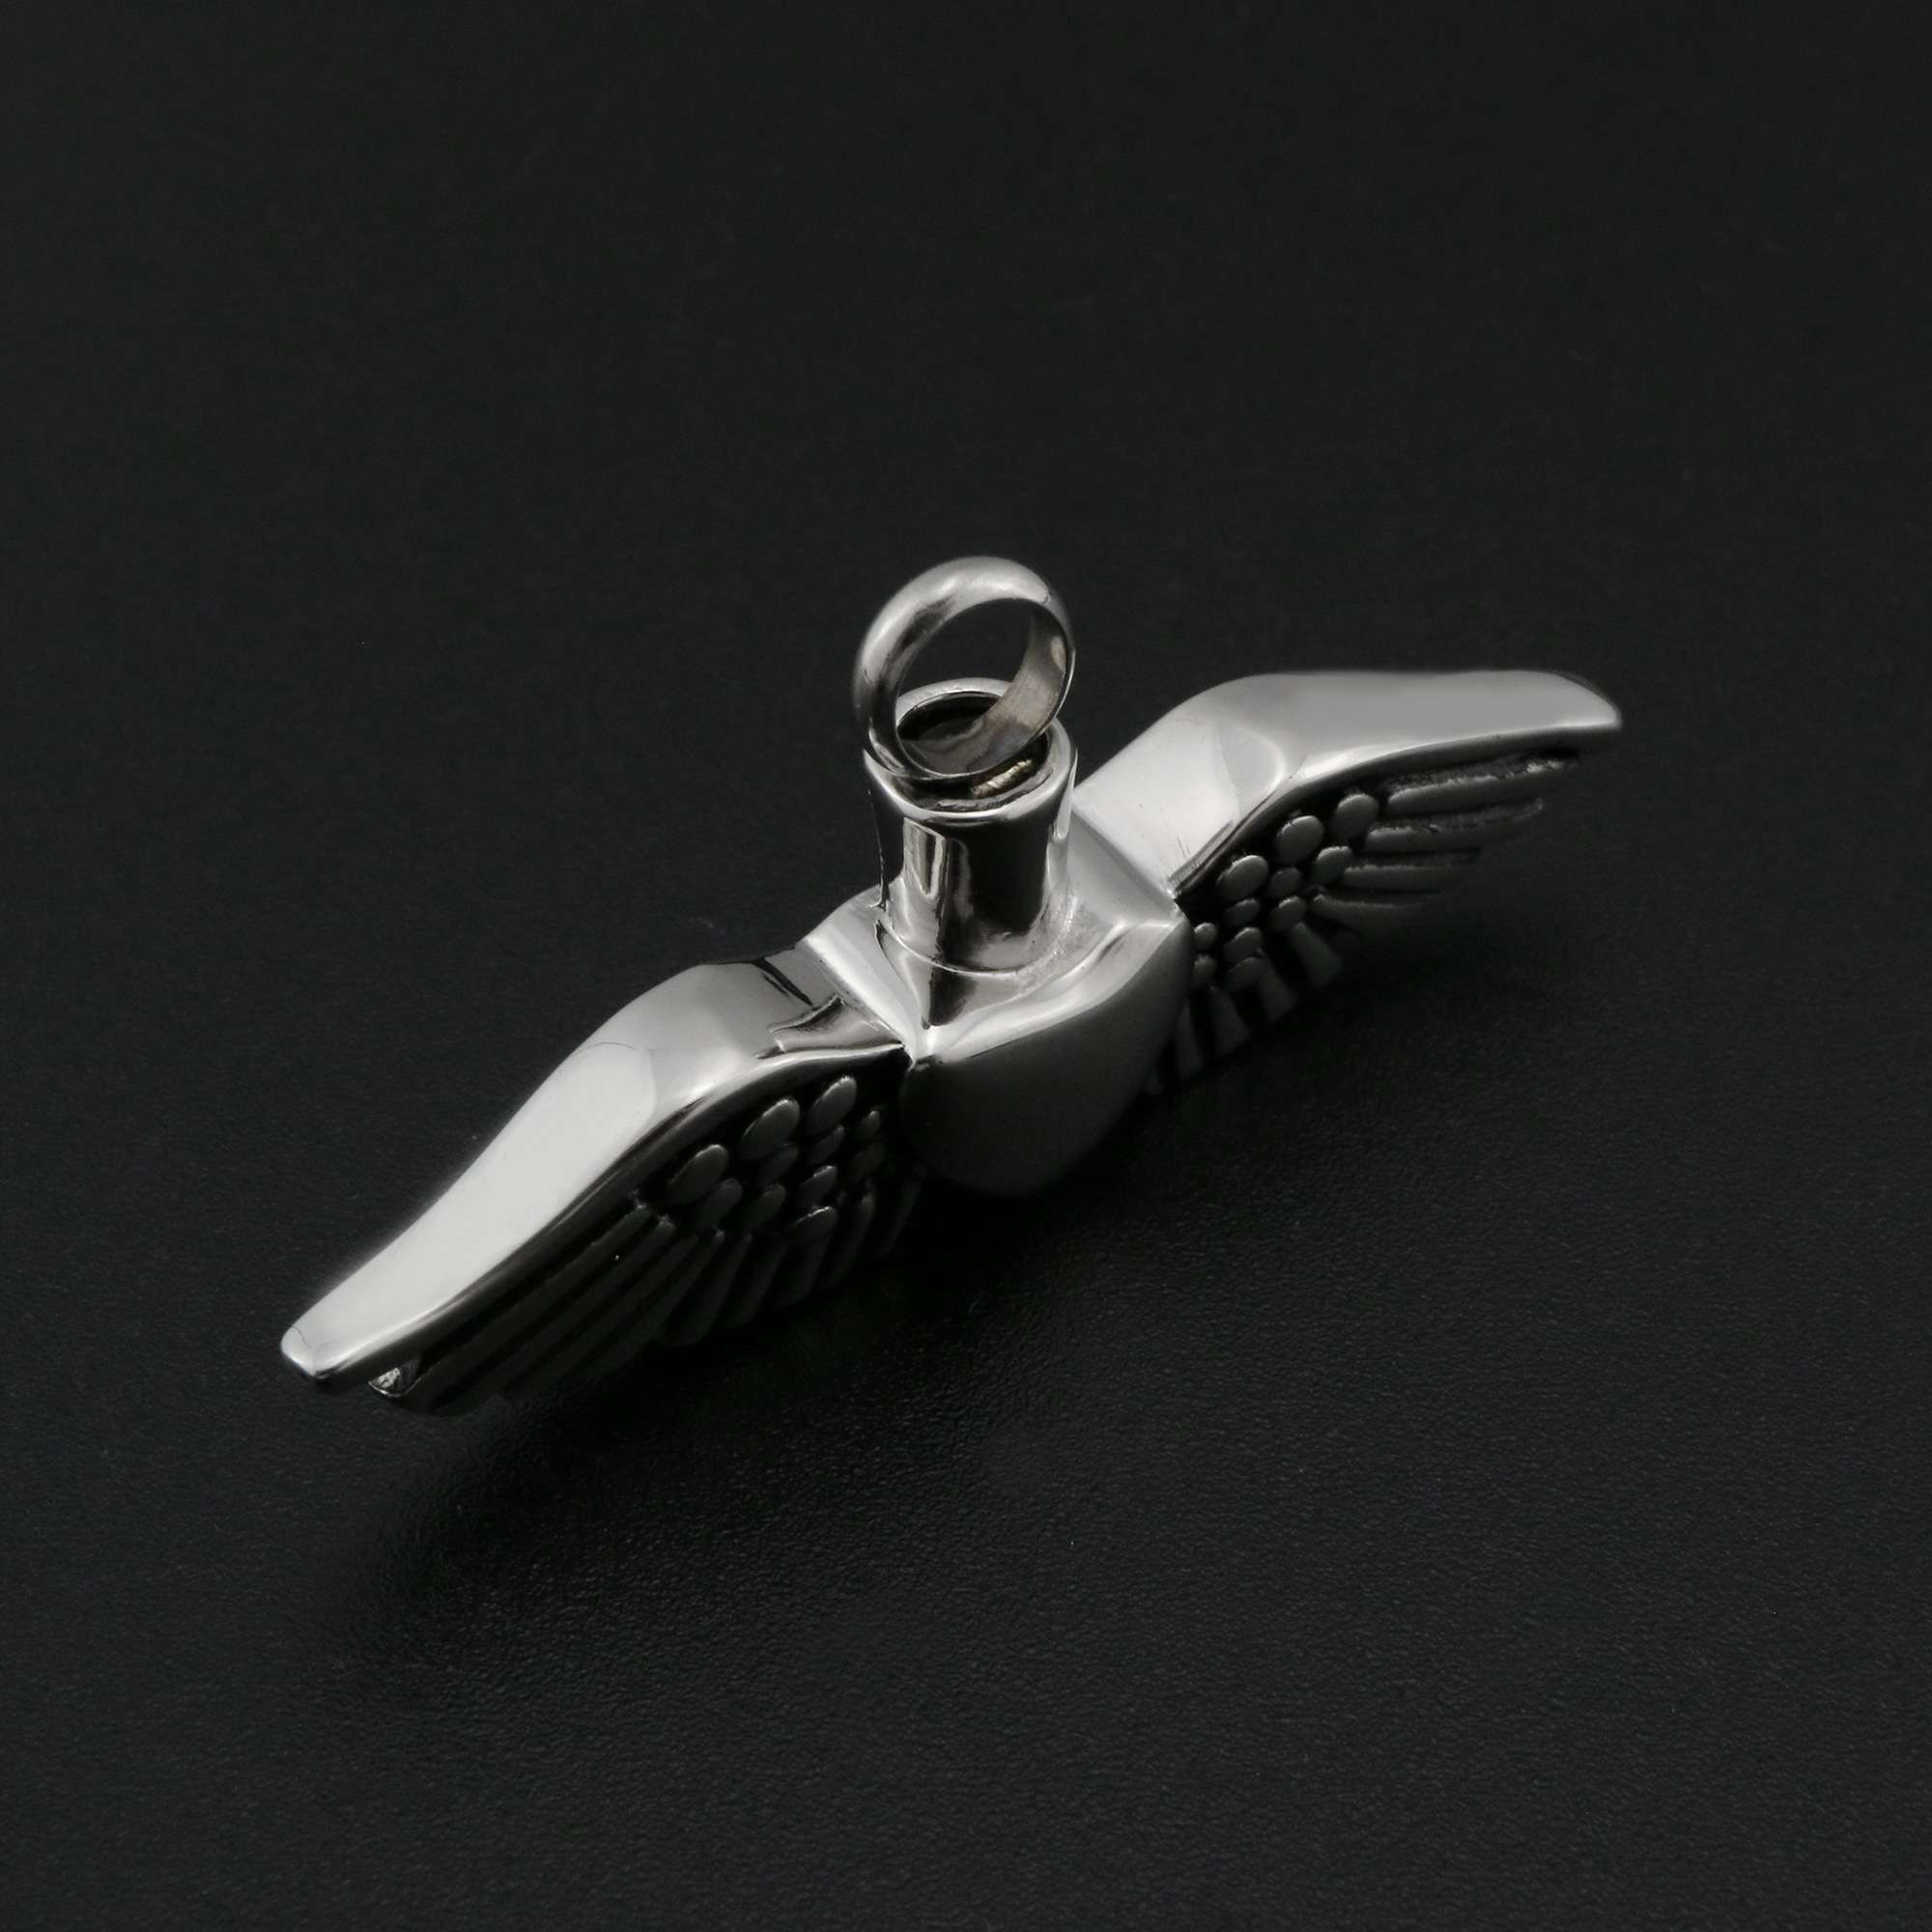 Heart Angel Wing Keepsake Memorial Pendant Ash Canister Cremation Urn Wish Vial Pendant Prayer Purfume Box 23x46MM 1190026 - Click Image to Close